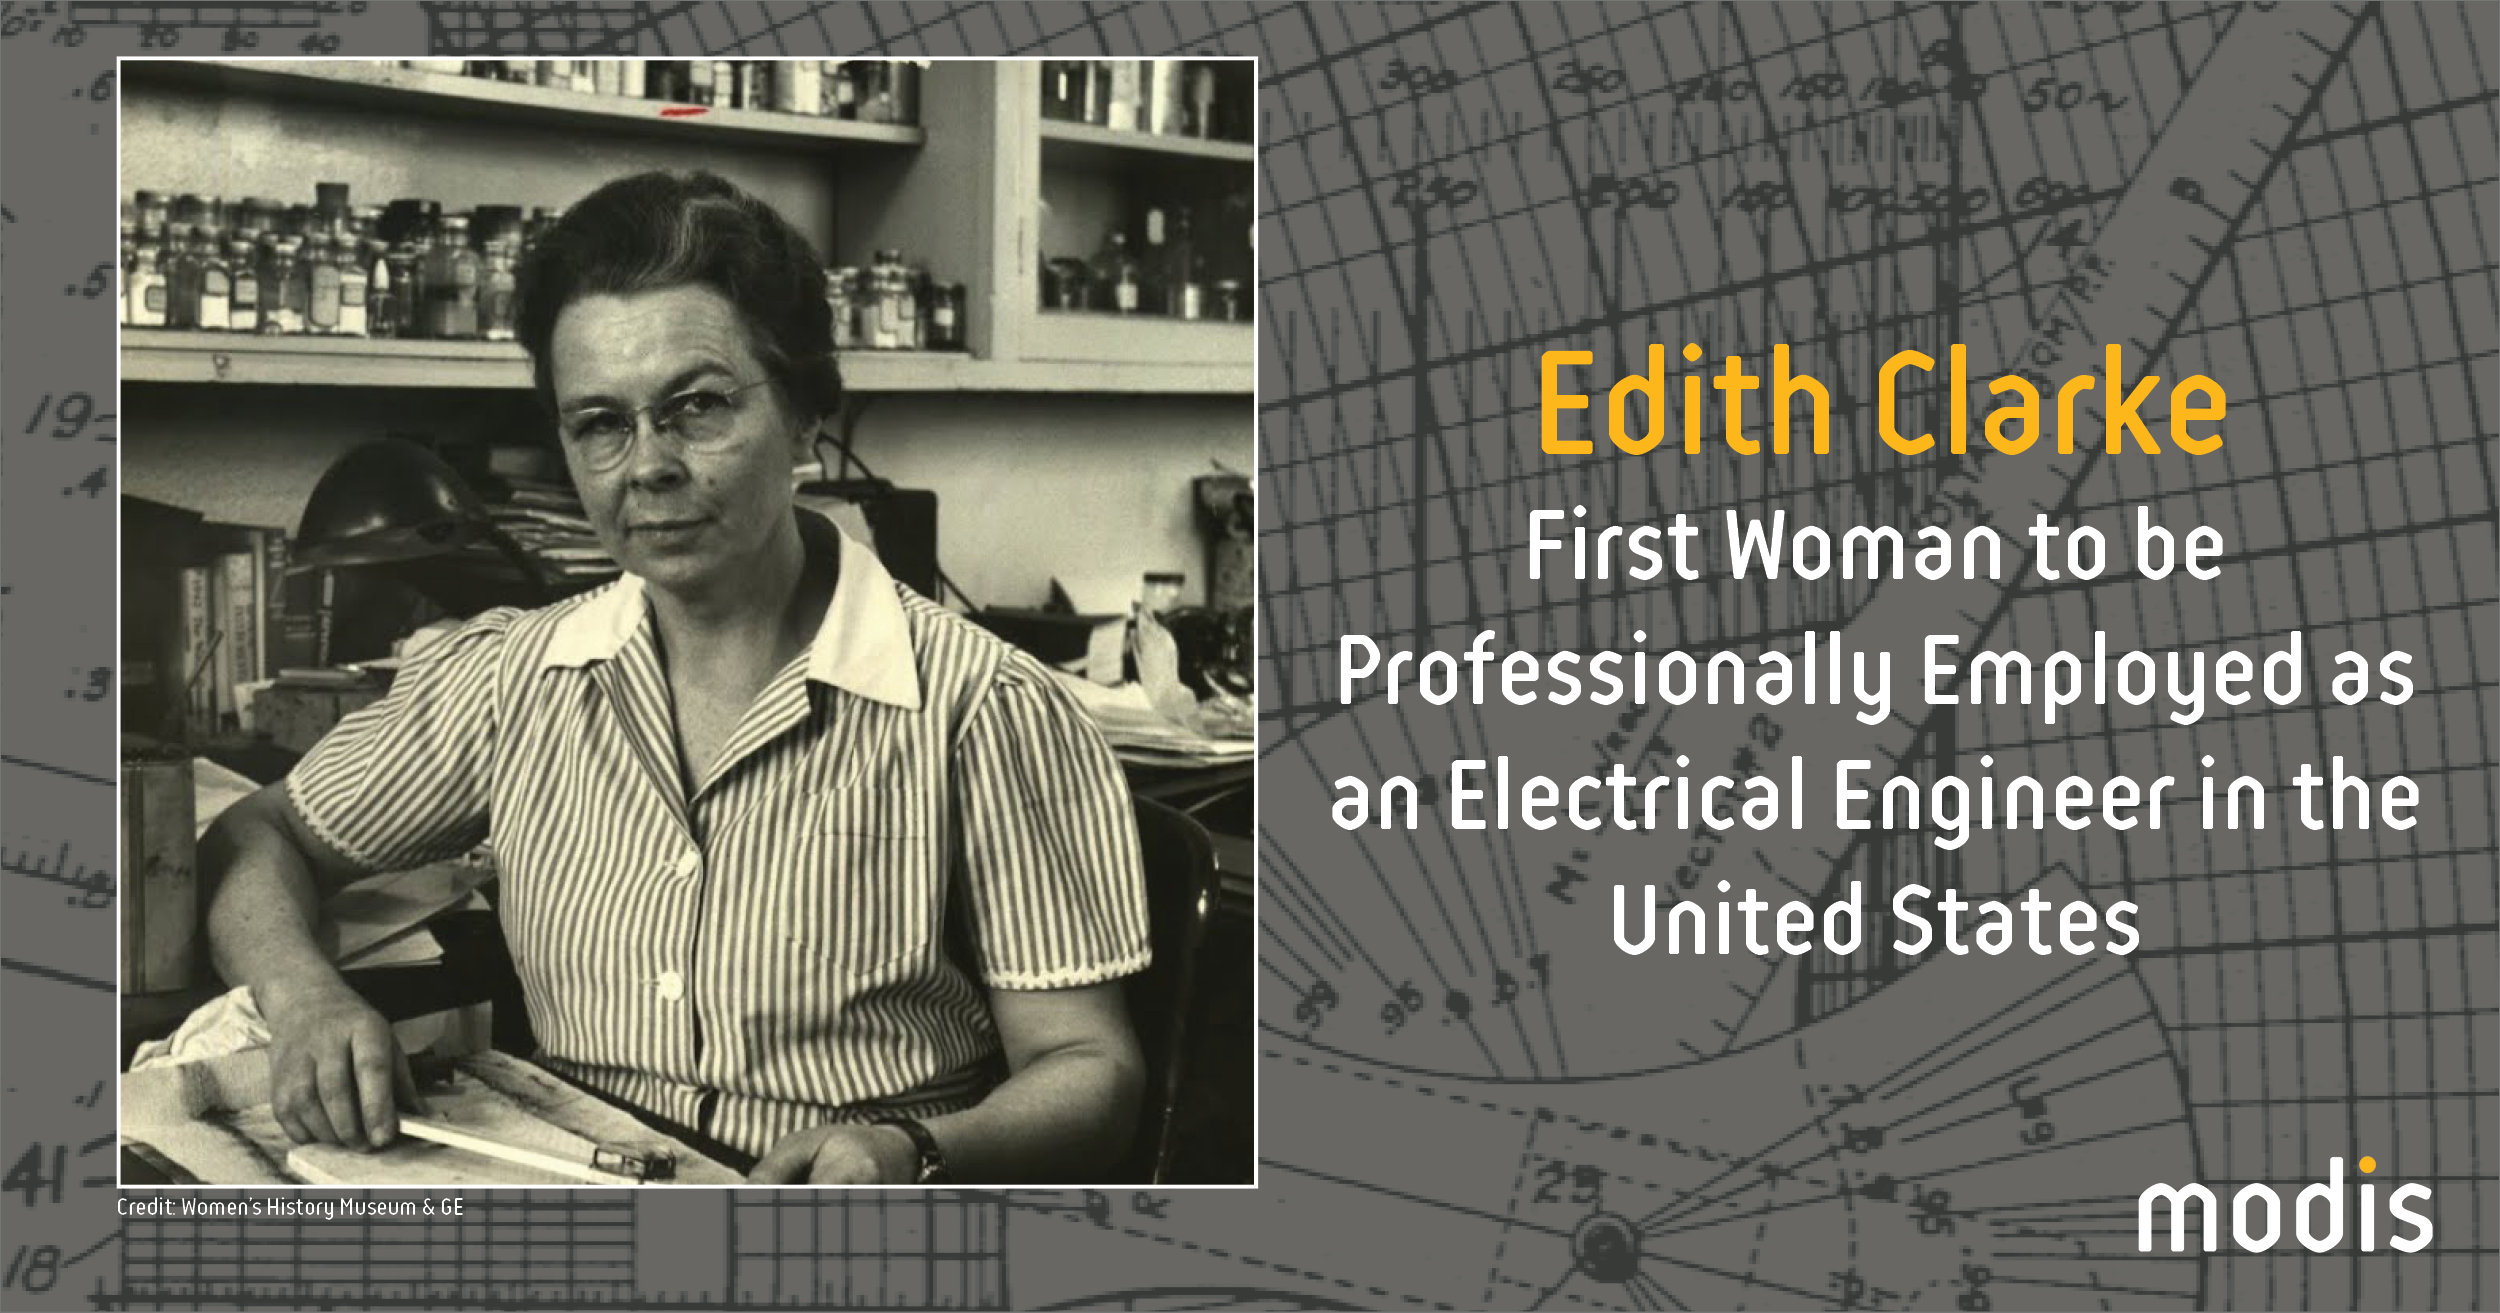 Edith Clarke, first woman to be professional employed as an electrical engineer in the US